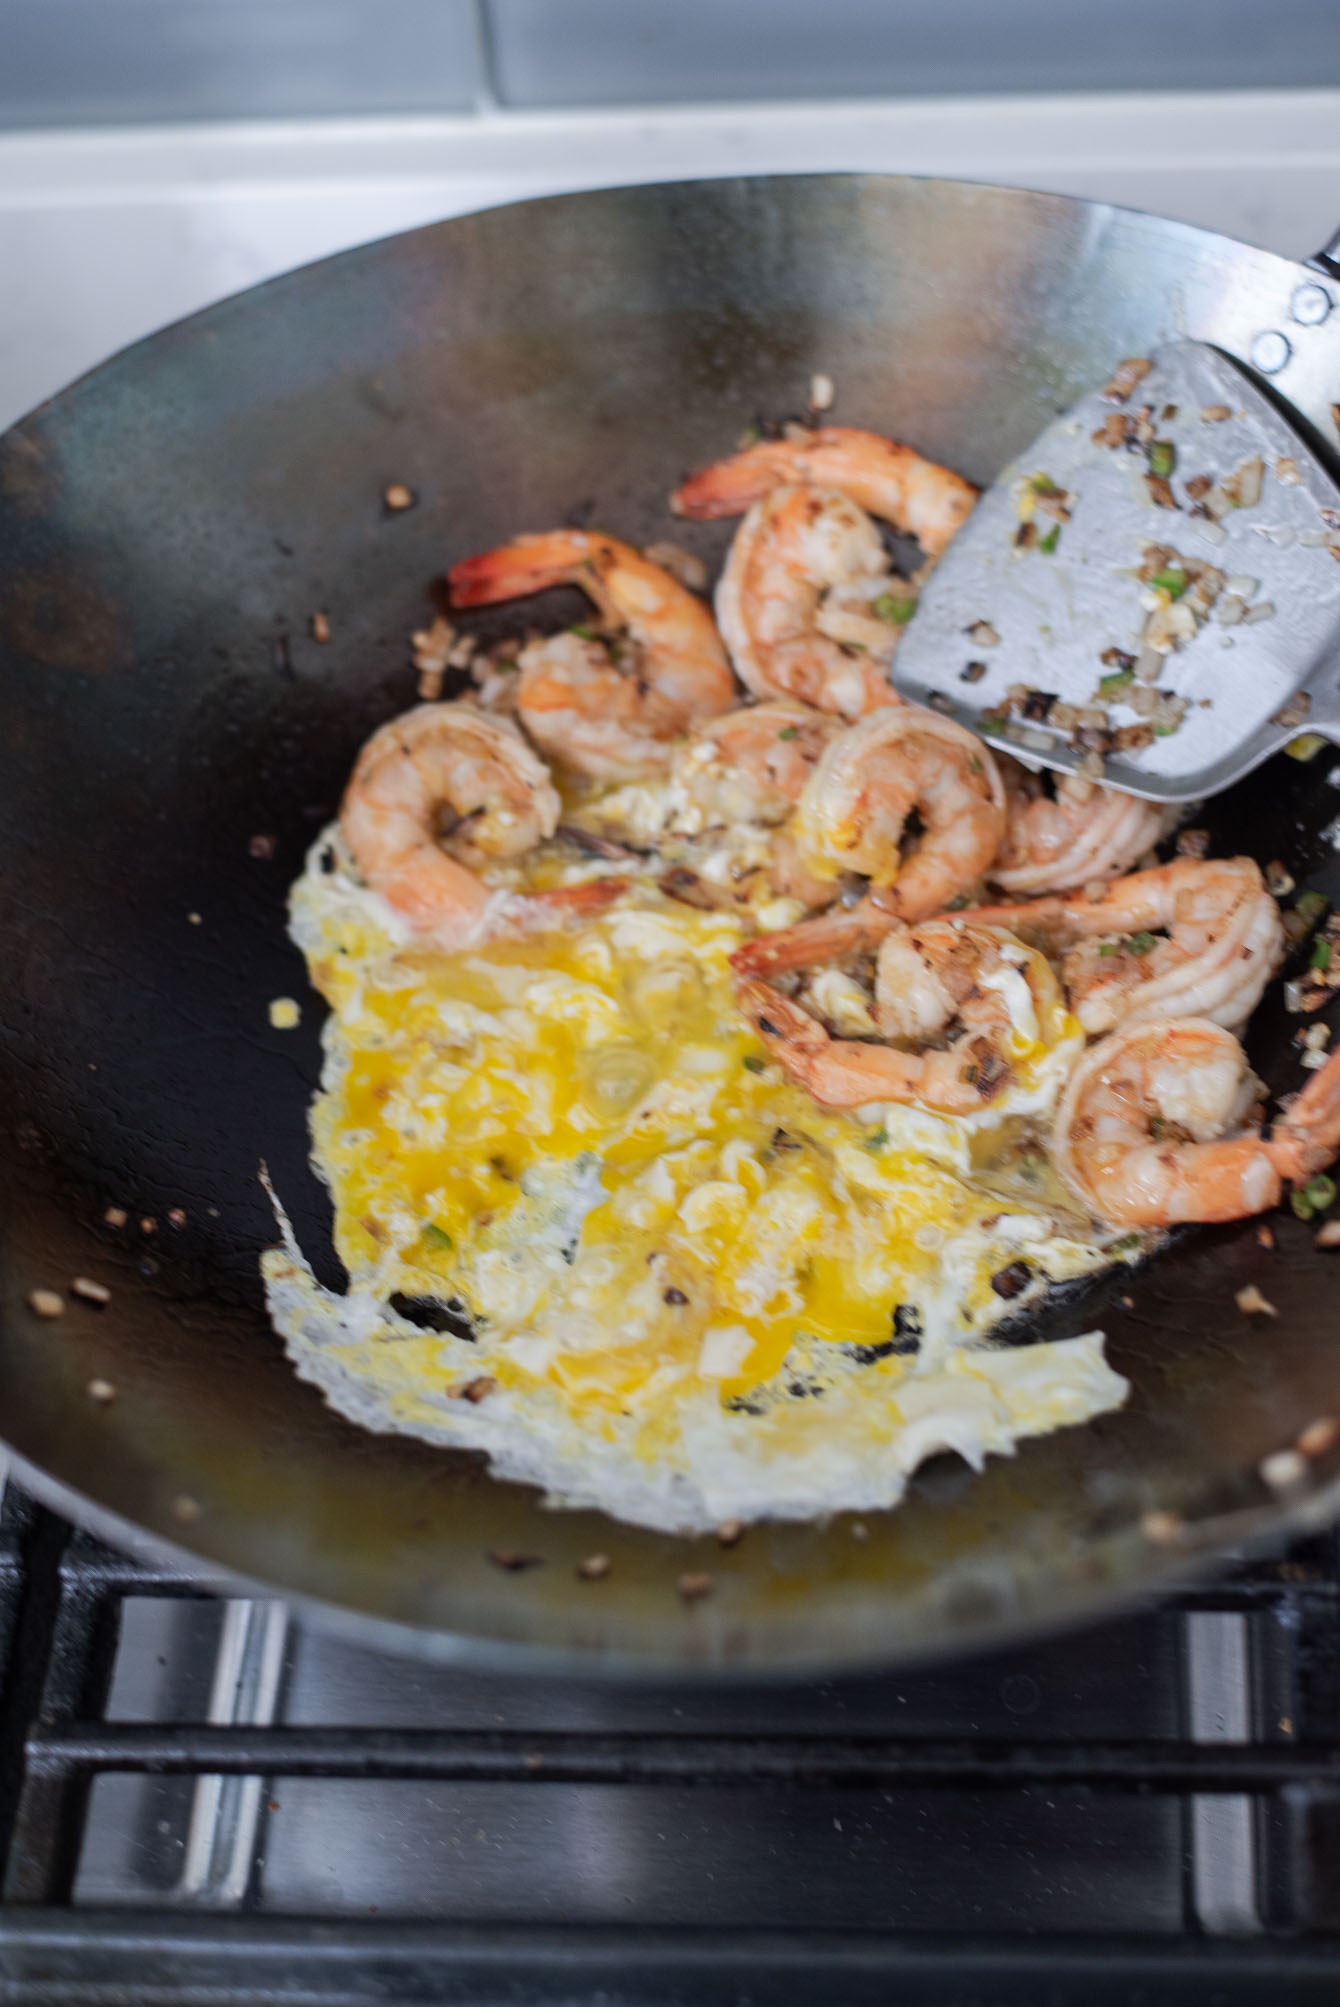 Eggs are scrambled in a wok with shrimp